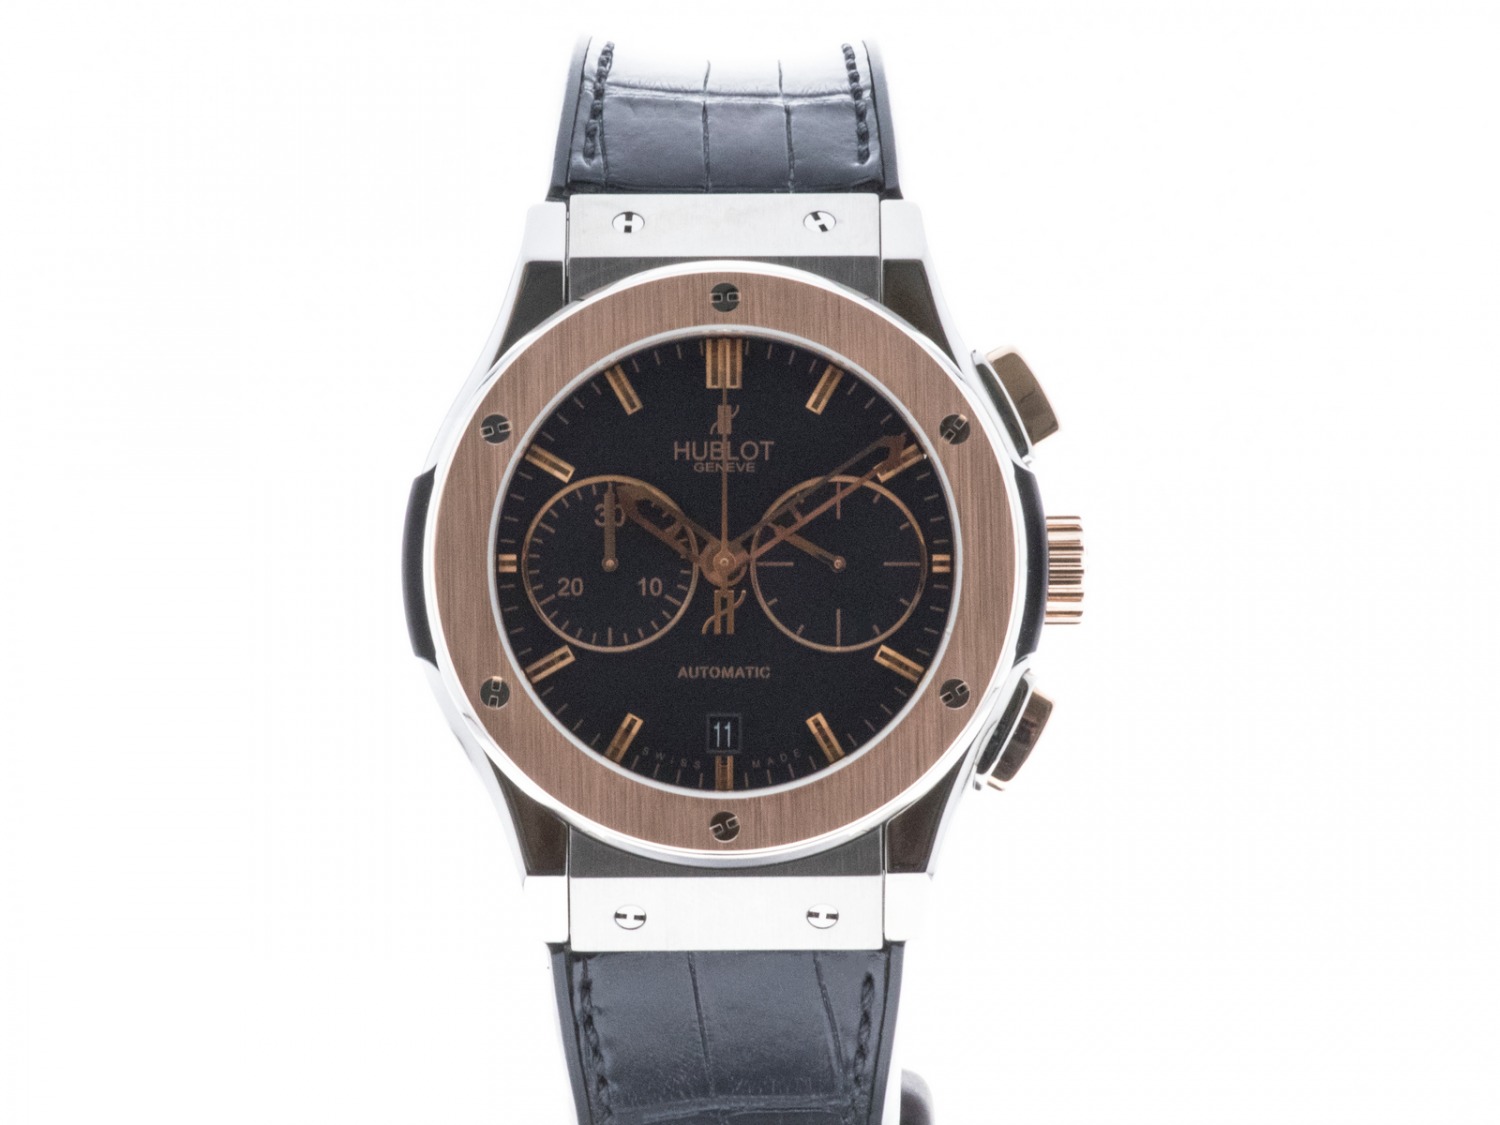 Hublot Classic Fusion 45MM Ref. 521.NO.1180.LR watch, two-tone (bi-colored) silver (case) and rose gold (bezel)